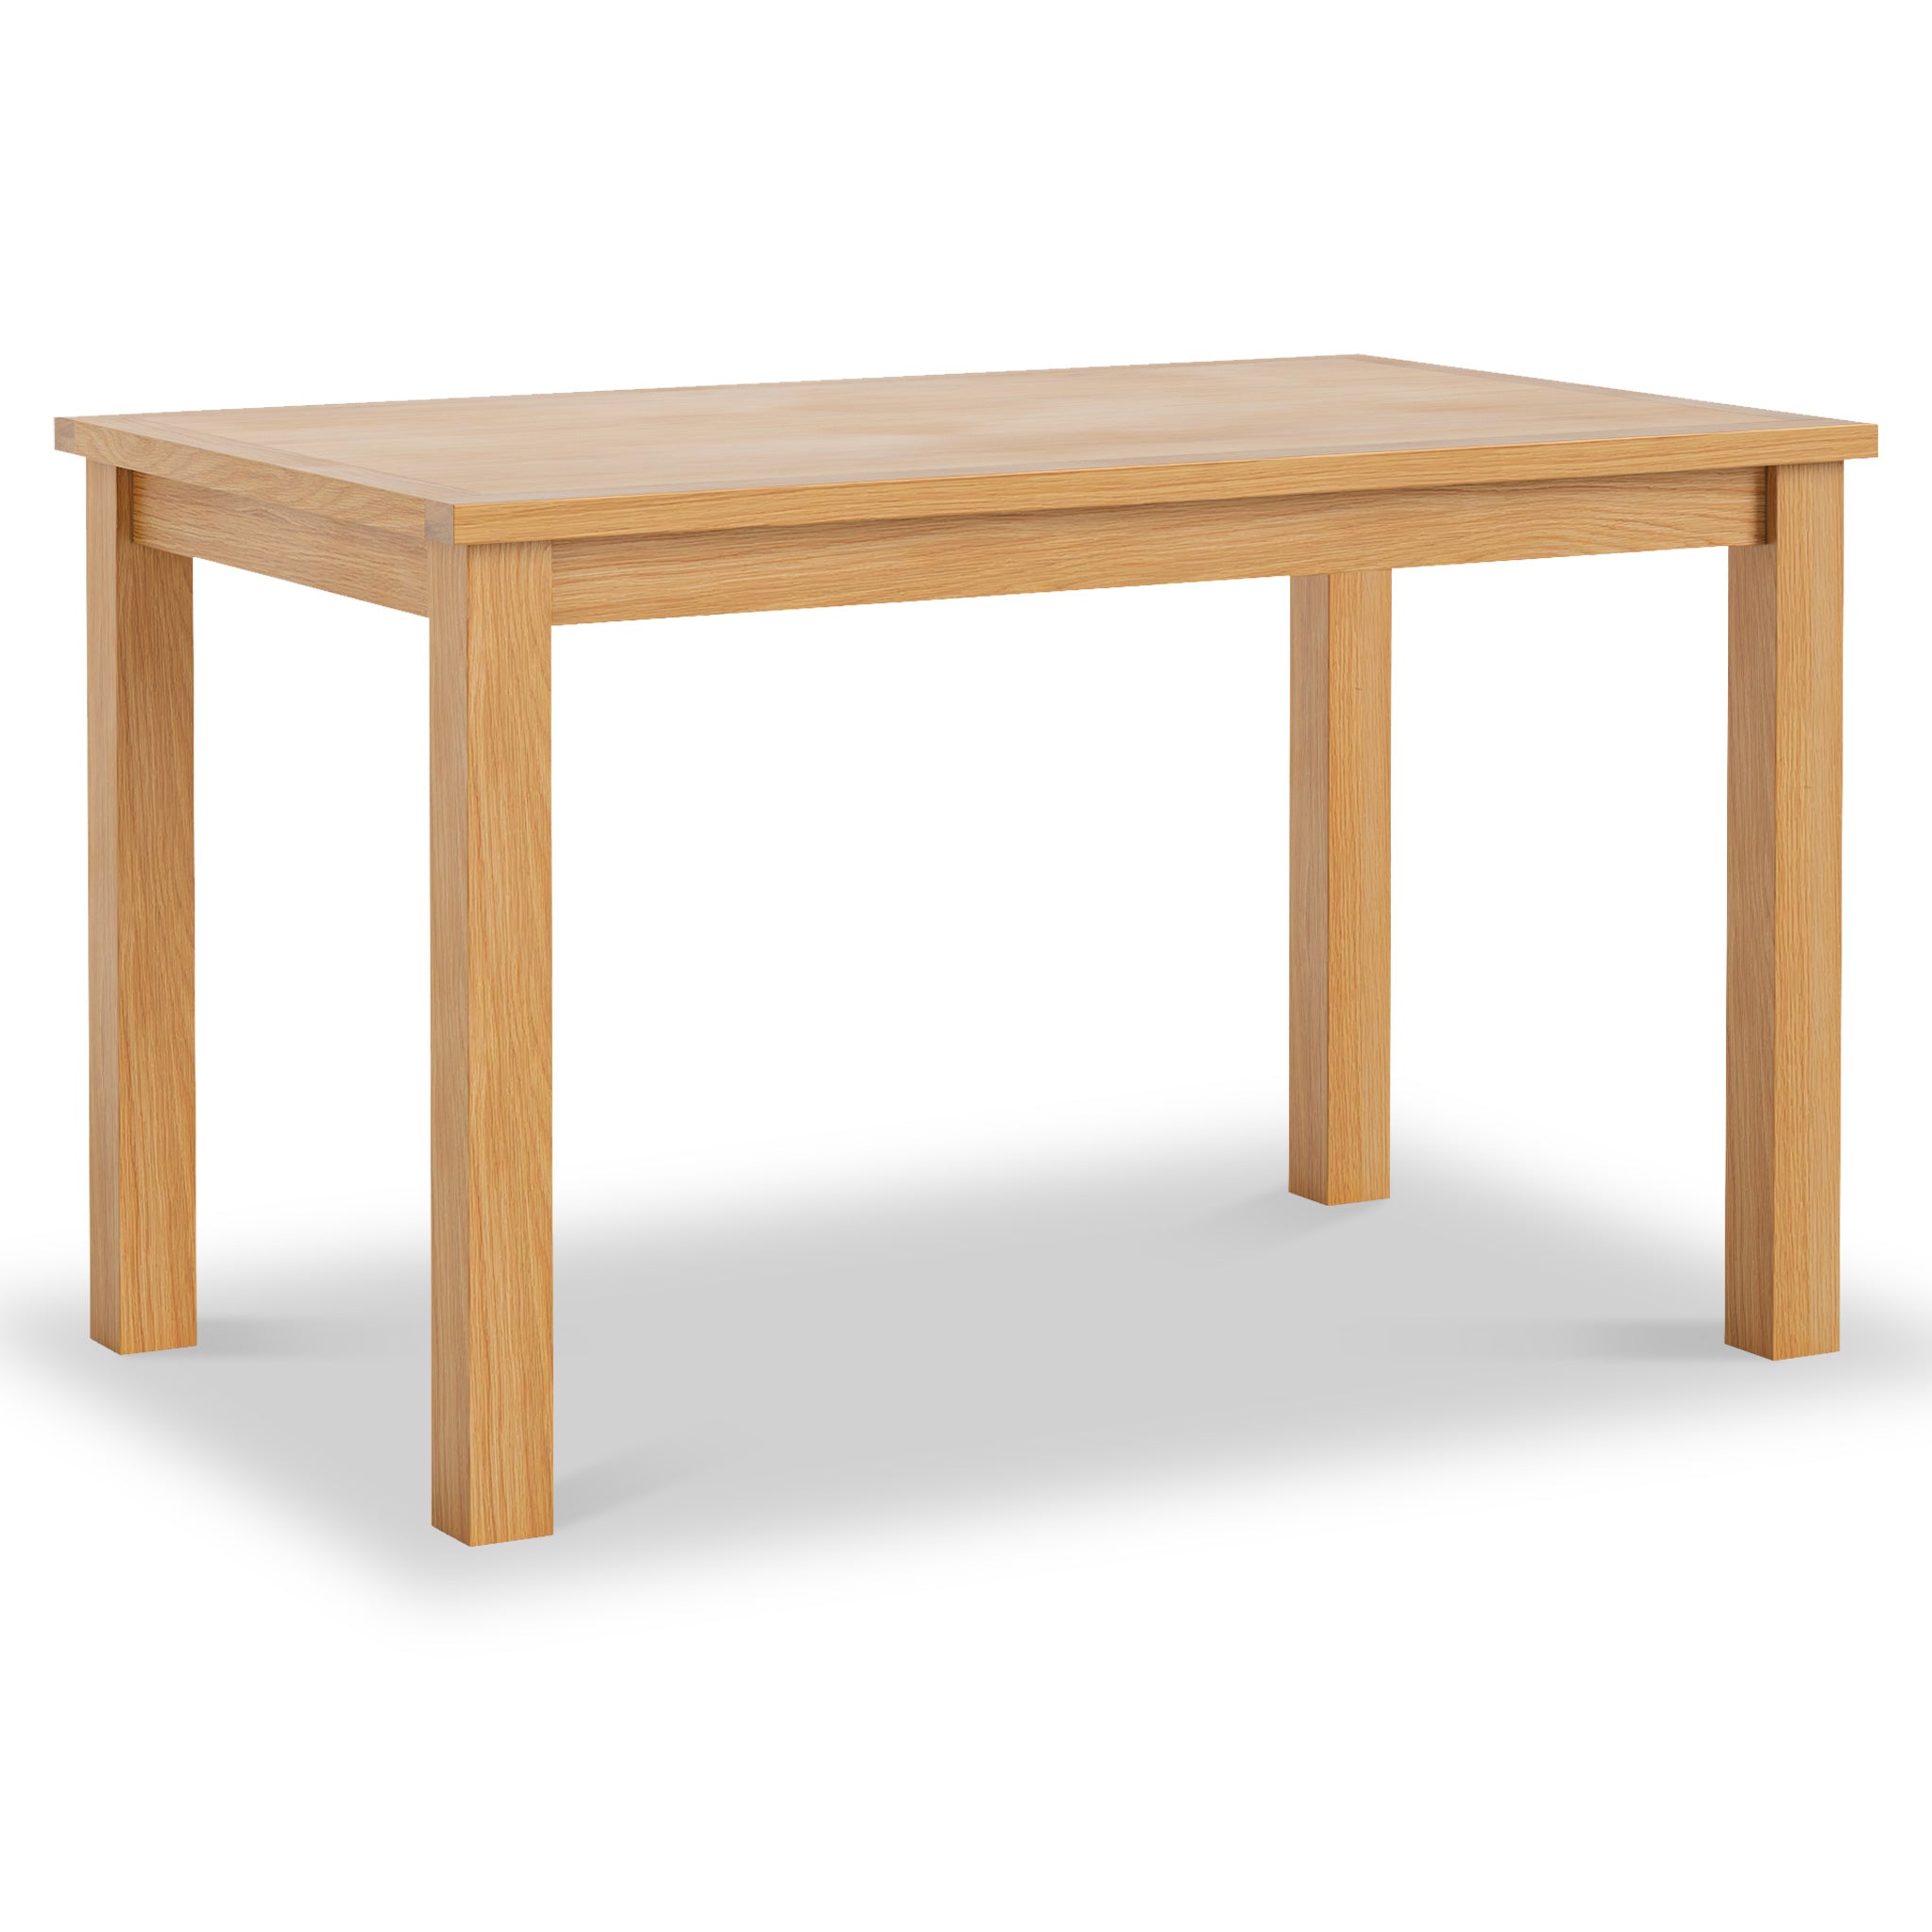 London Oak Contemporary 130cm Fixed Dining Table Roseland